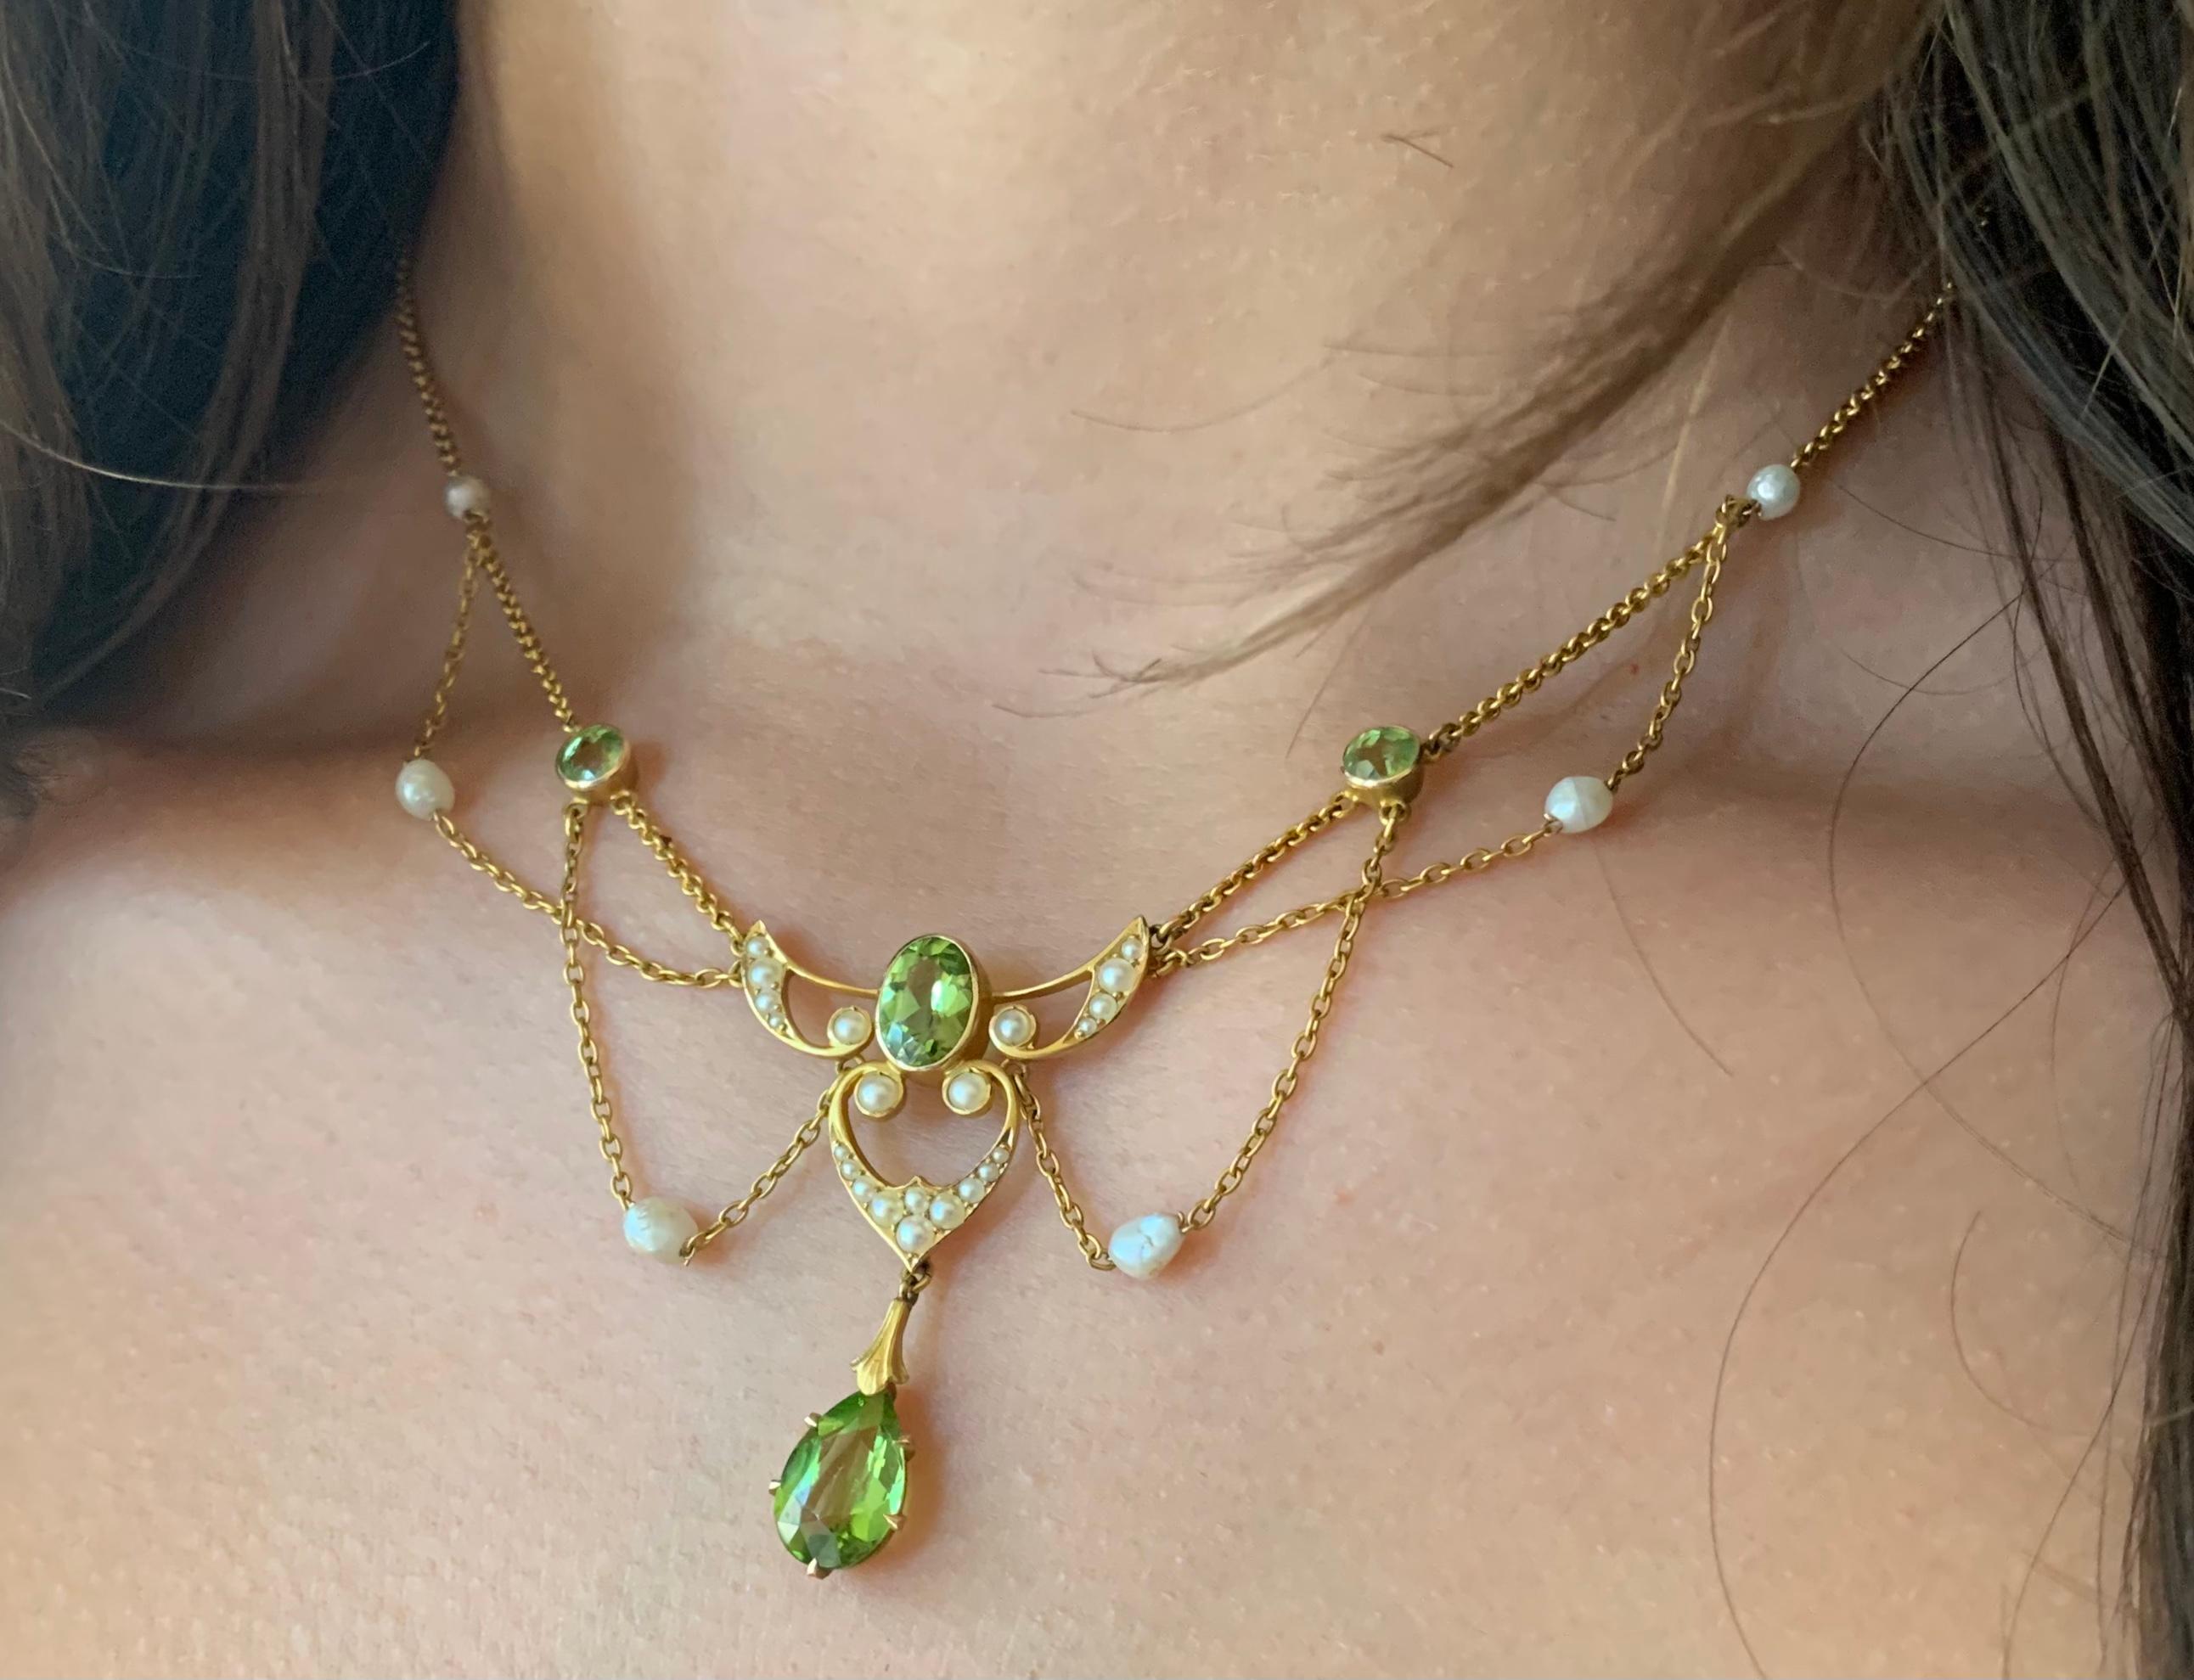 Fine Art Nouveau Edwardian period Winged Heart motif peridot, pearl, 14K yellow gold necklace. 
Circa 1900
The central pearl encrusted heart topped by a pair of pearl encrusted wings with a large 8mm by 5mm oval faceted peridot center, a lovely